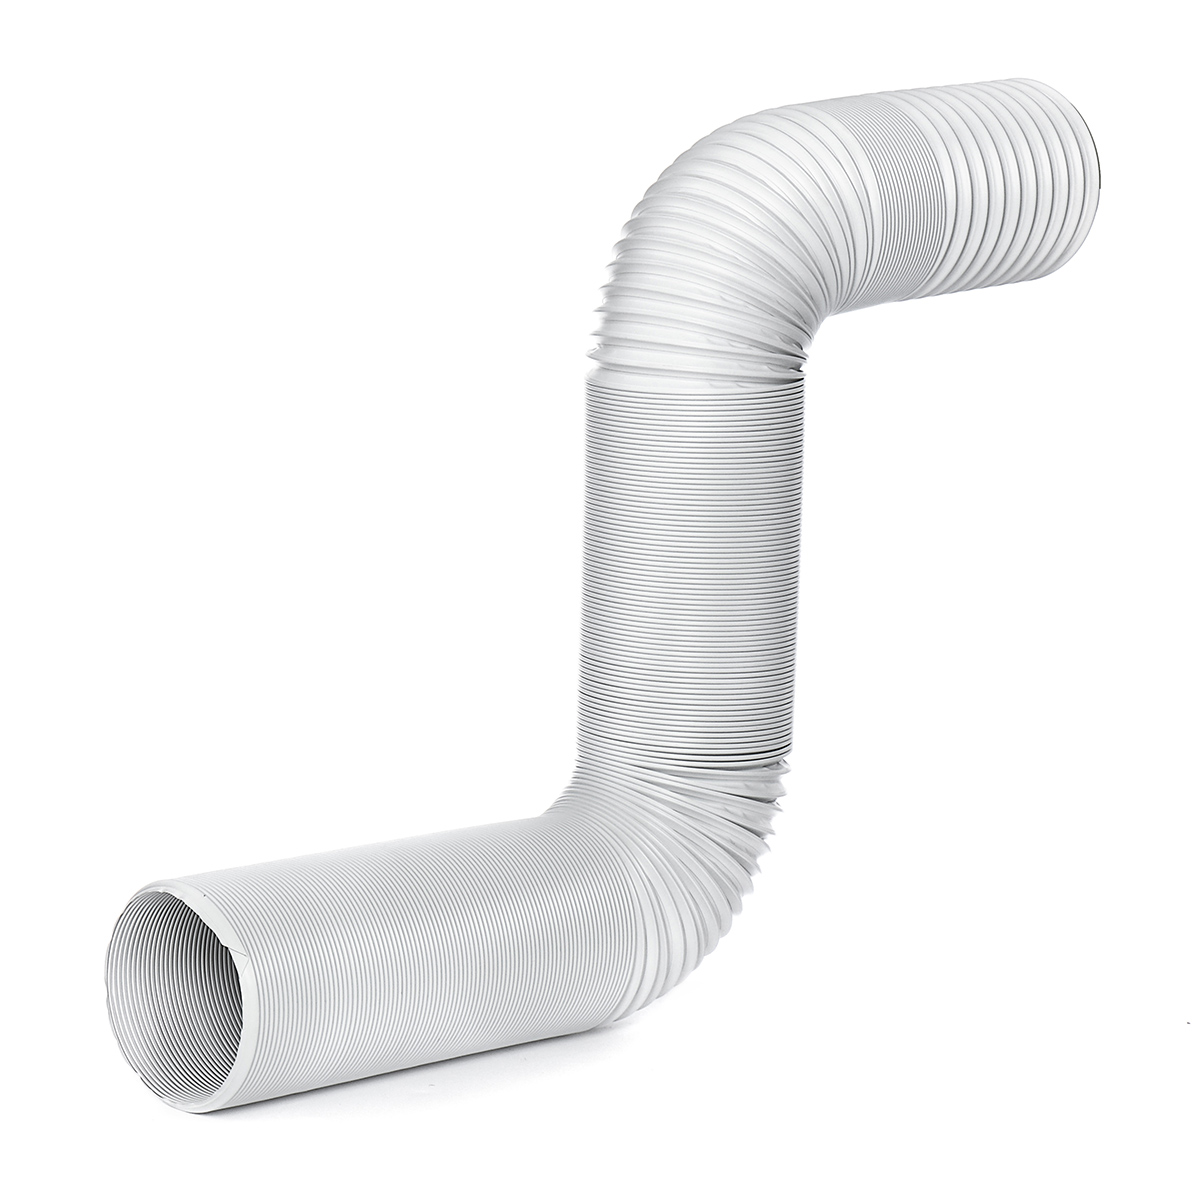 DIA-5-Universal-Pipe-Duct-Air-Conditioner-Exhaust-Hose-For-Range-Hoods-Kitchen-1554659-8